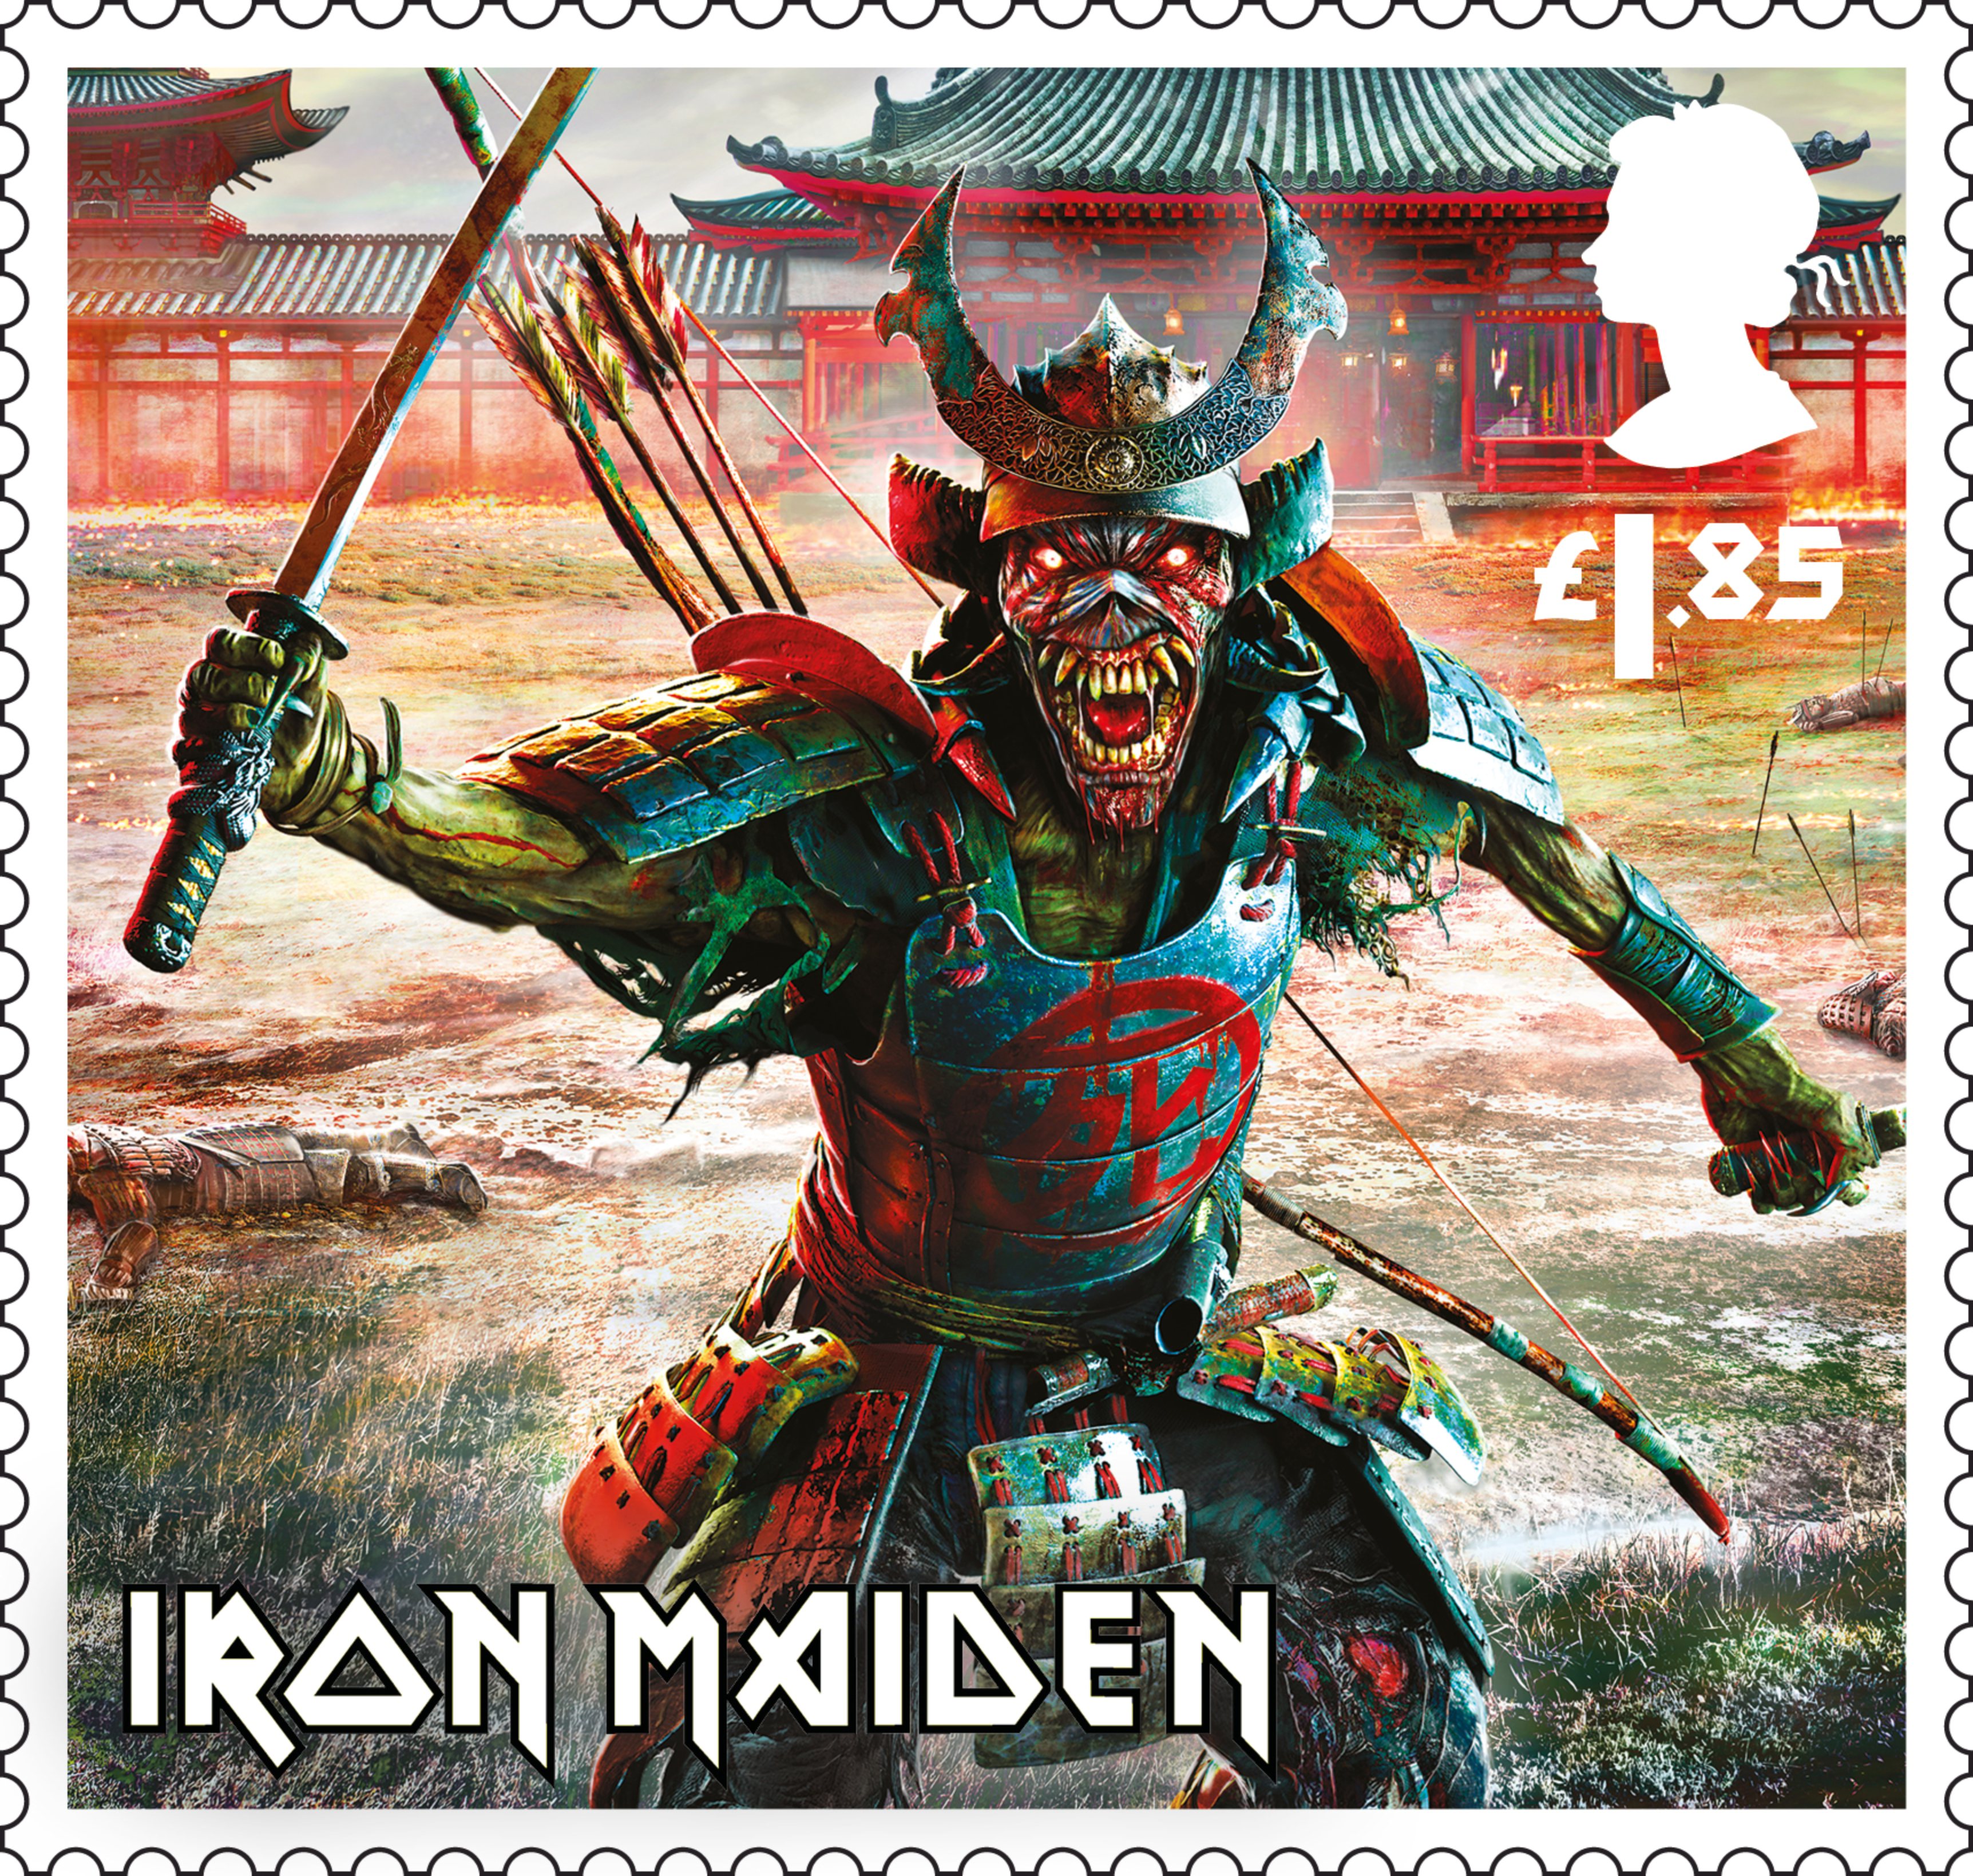 The stamps show four notorious Eddie artworks, including the latest addition featuring Eddie as a samurai warrior from the recent Senjutsu album. 